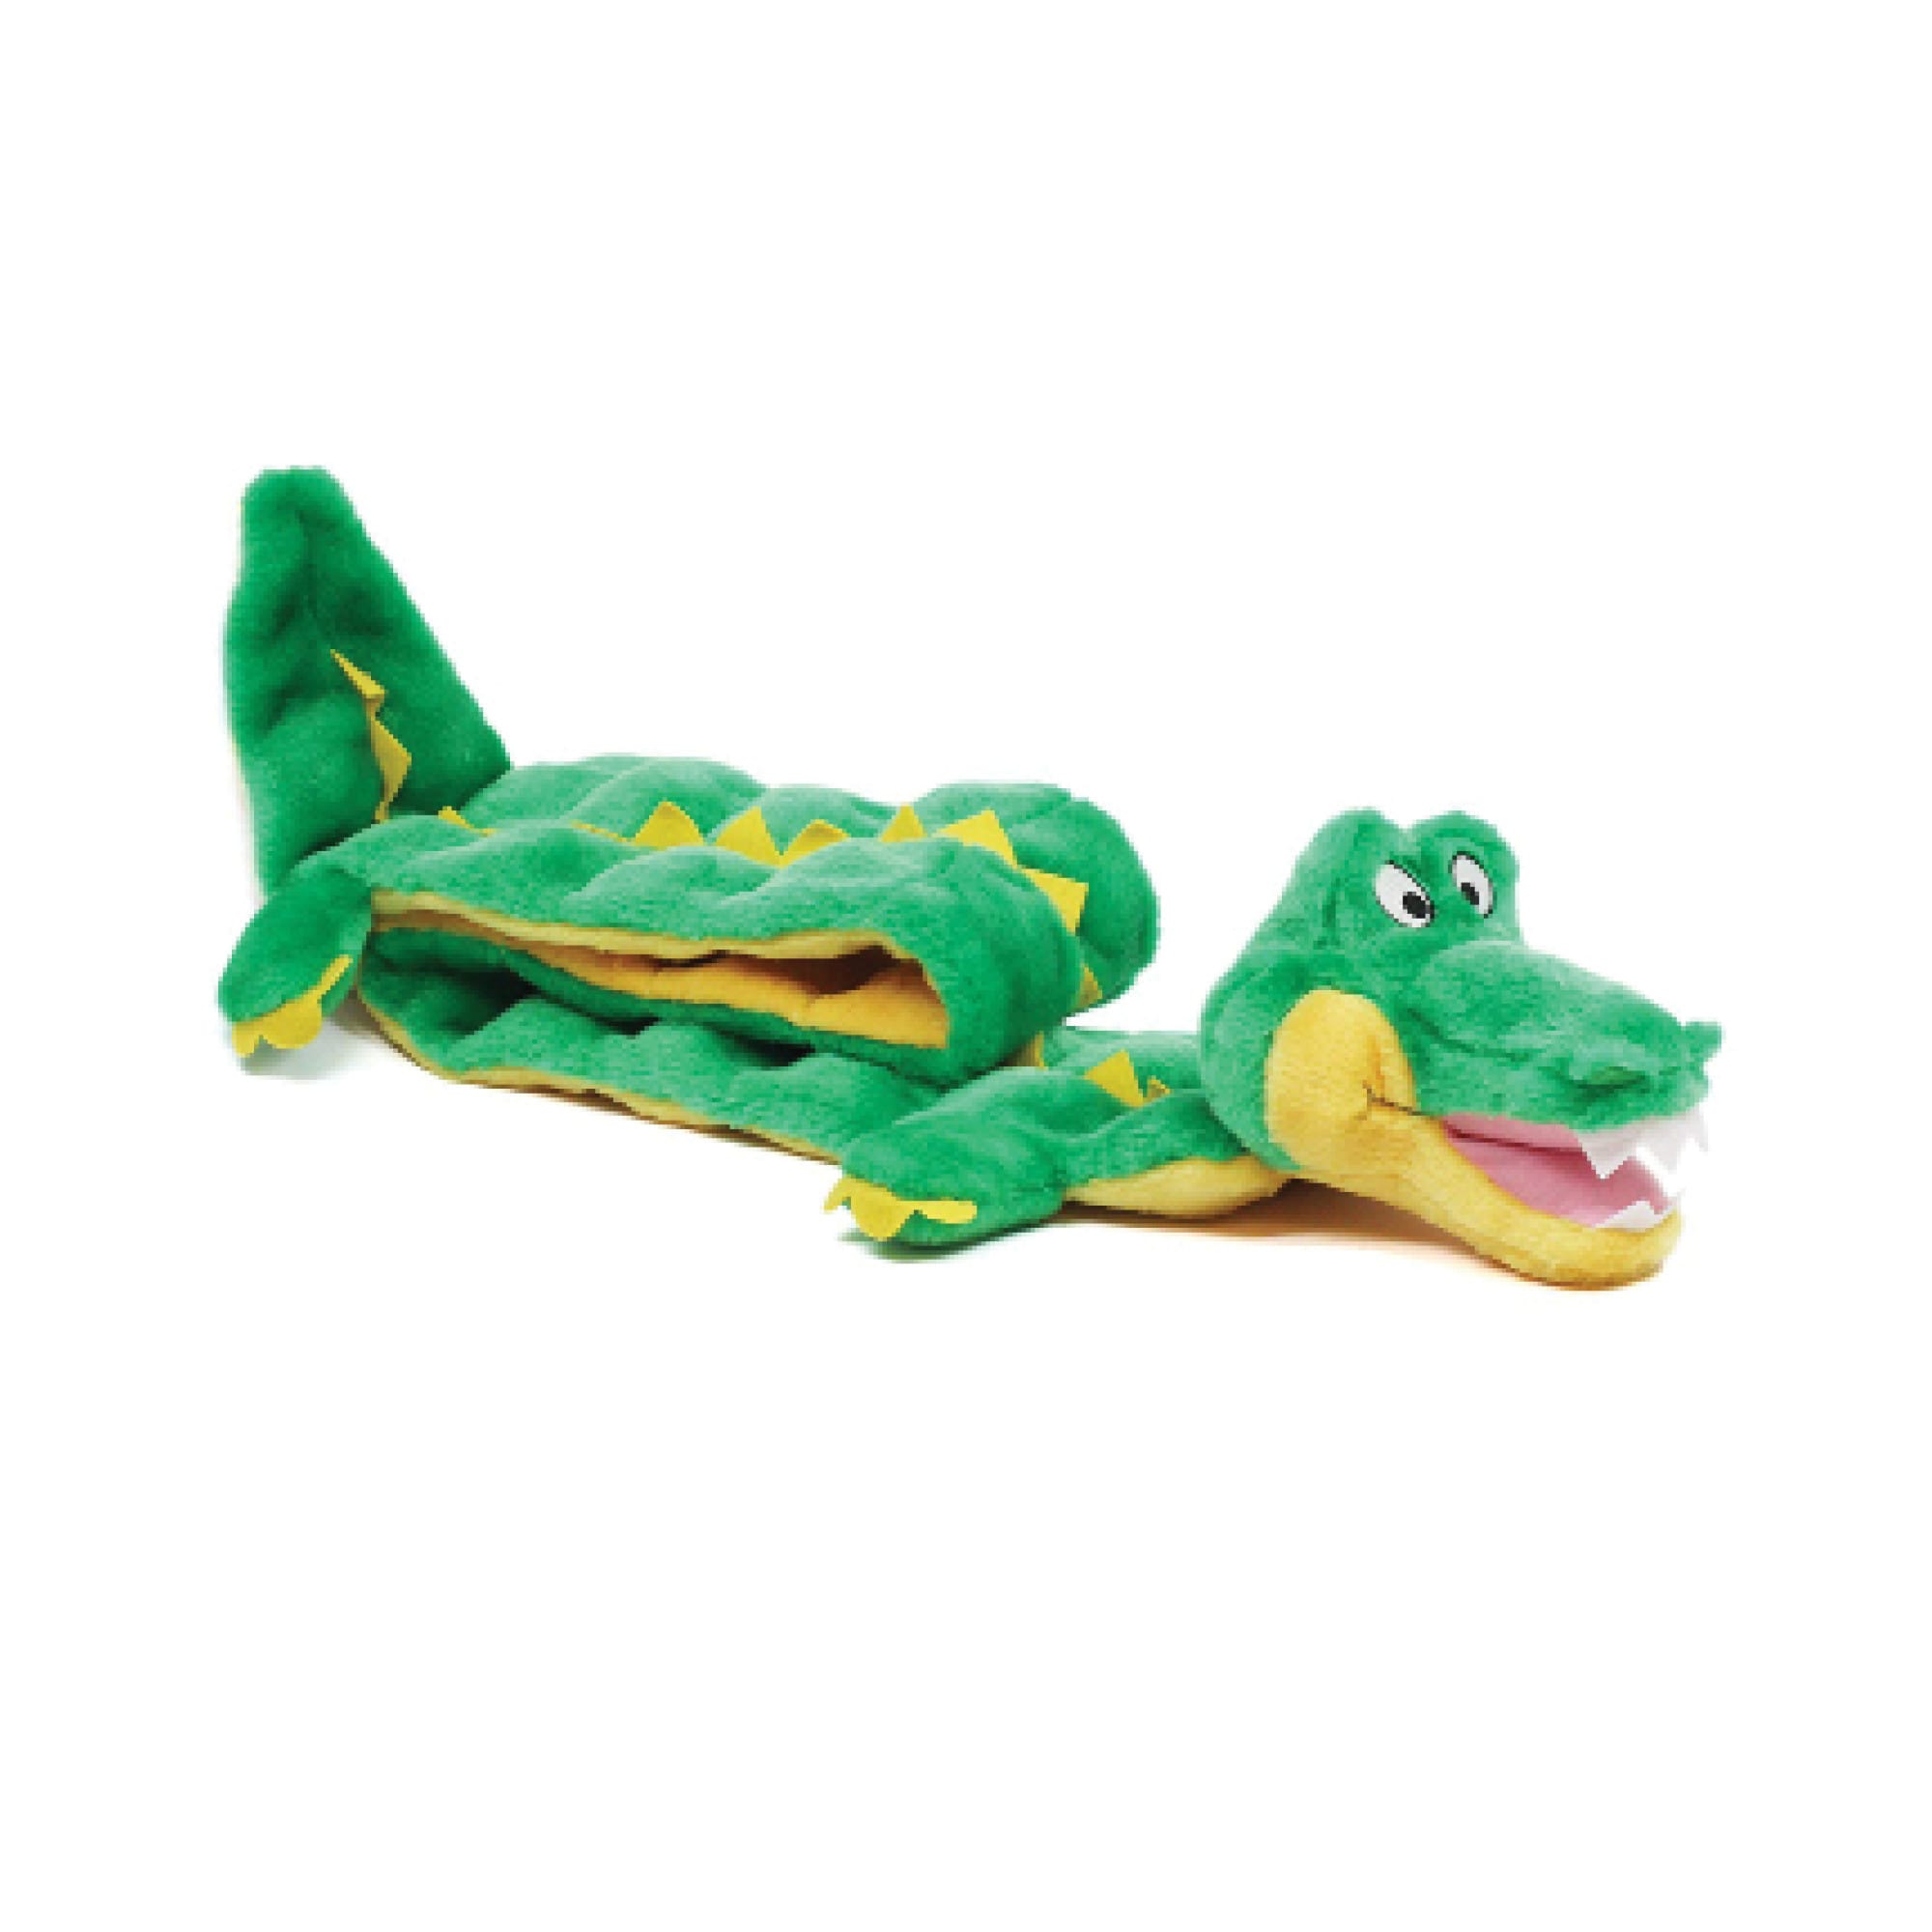 Gator Polyester Tack Cloth in the Cleaning Cloths department at